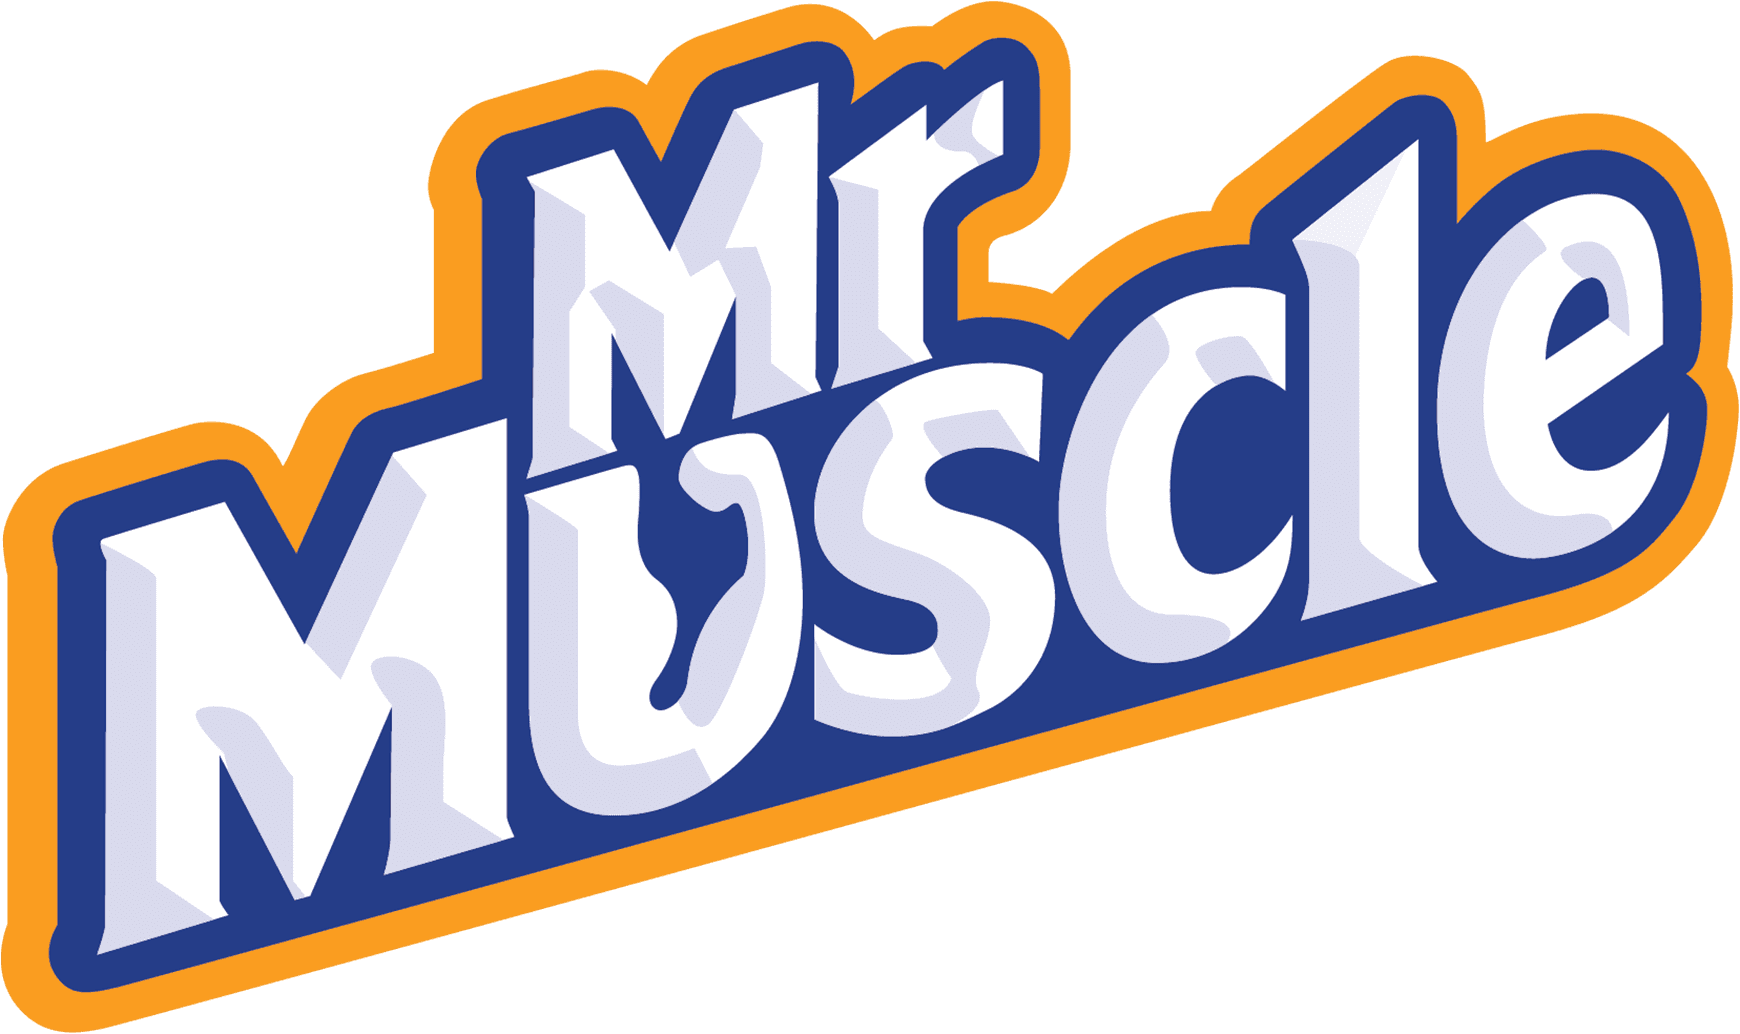 MR MUSCLE